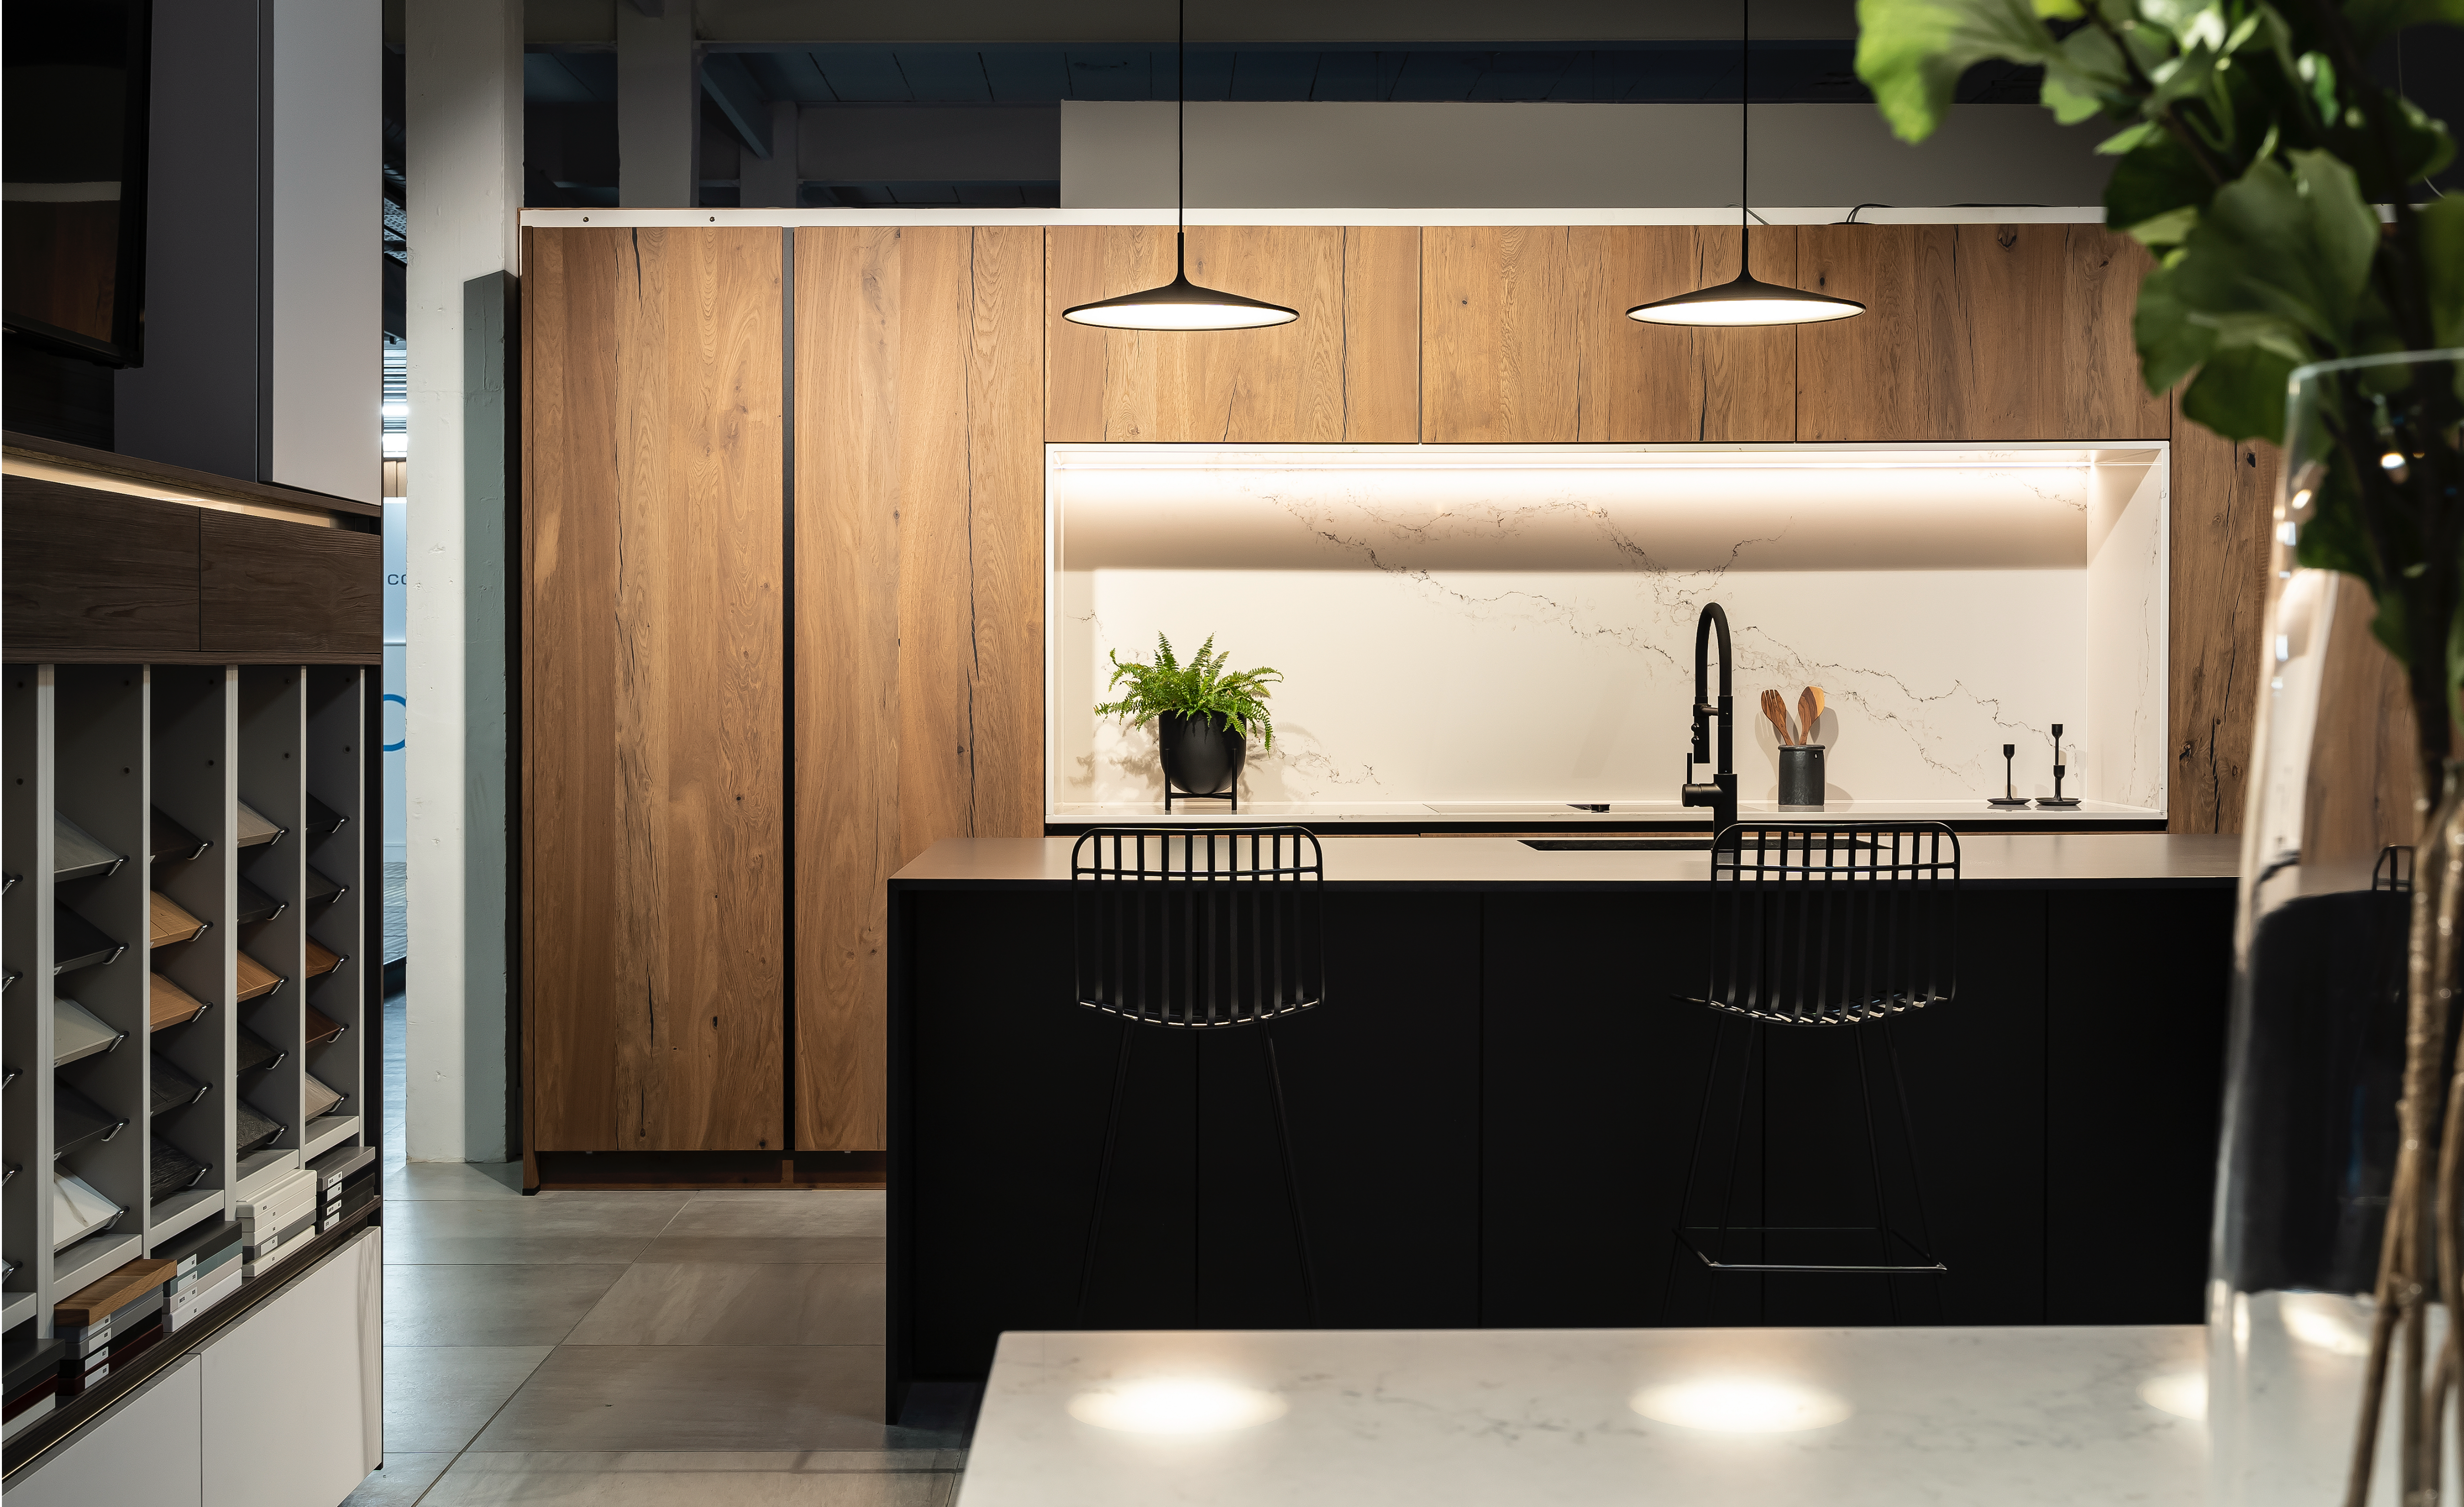 Featured image for “Amersham Unveiled: Watermark’s Newest Kitchen Showroom In The Spotlight”